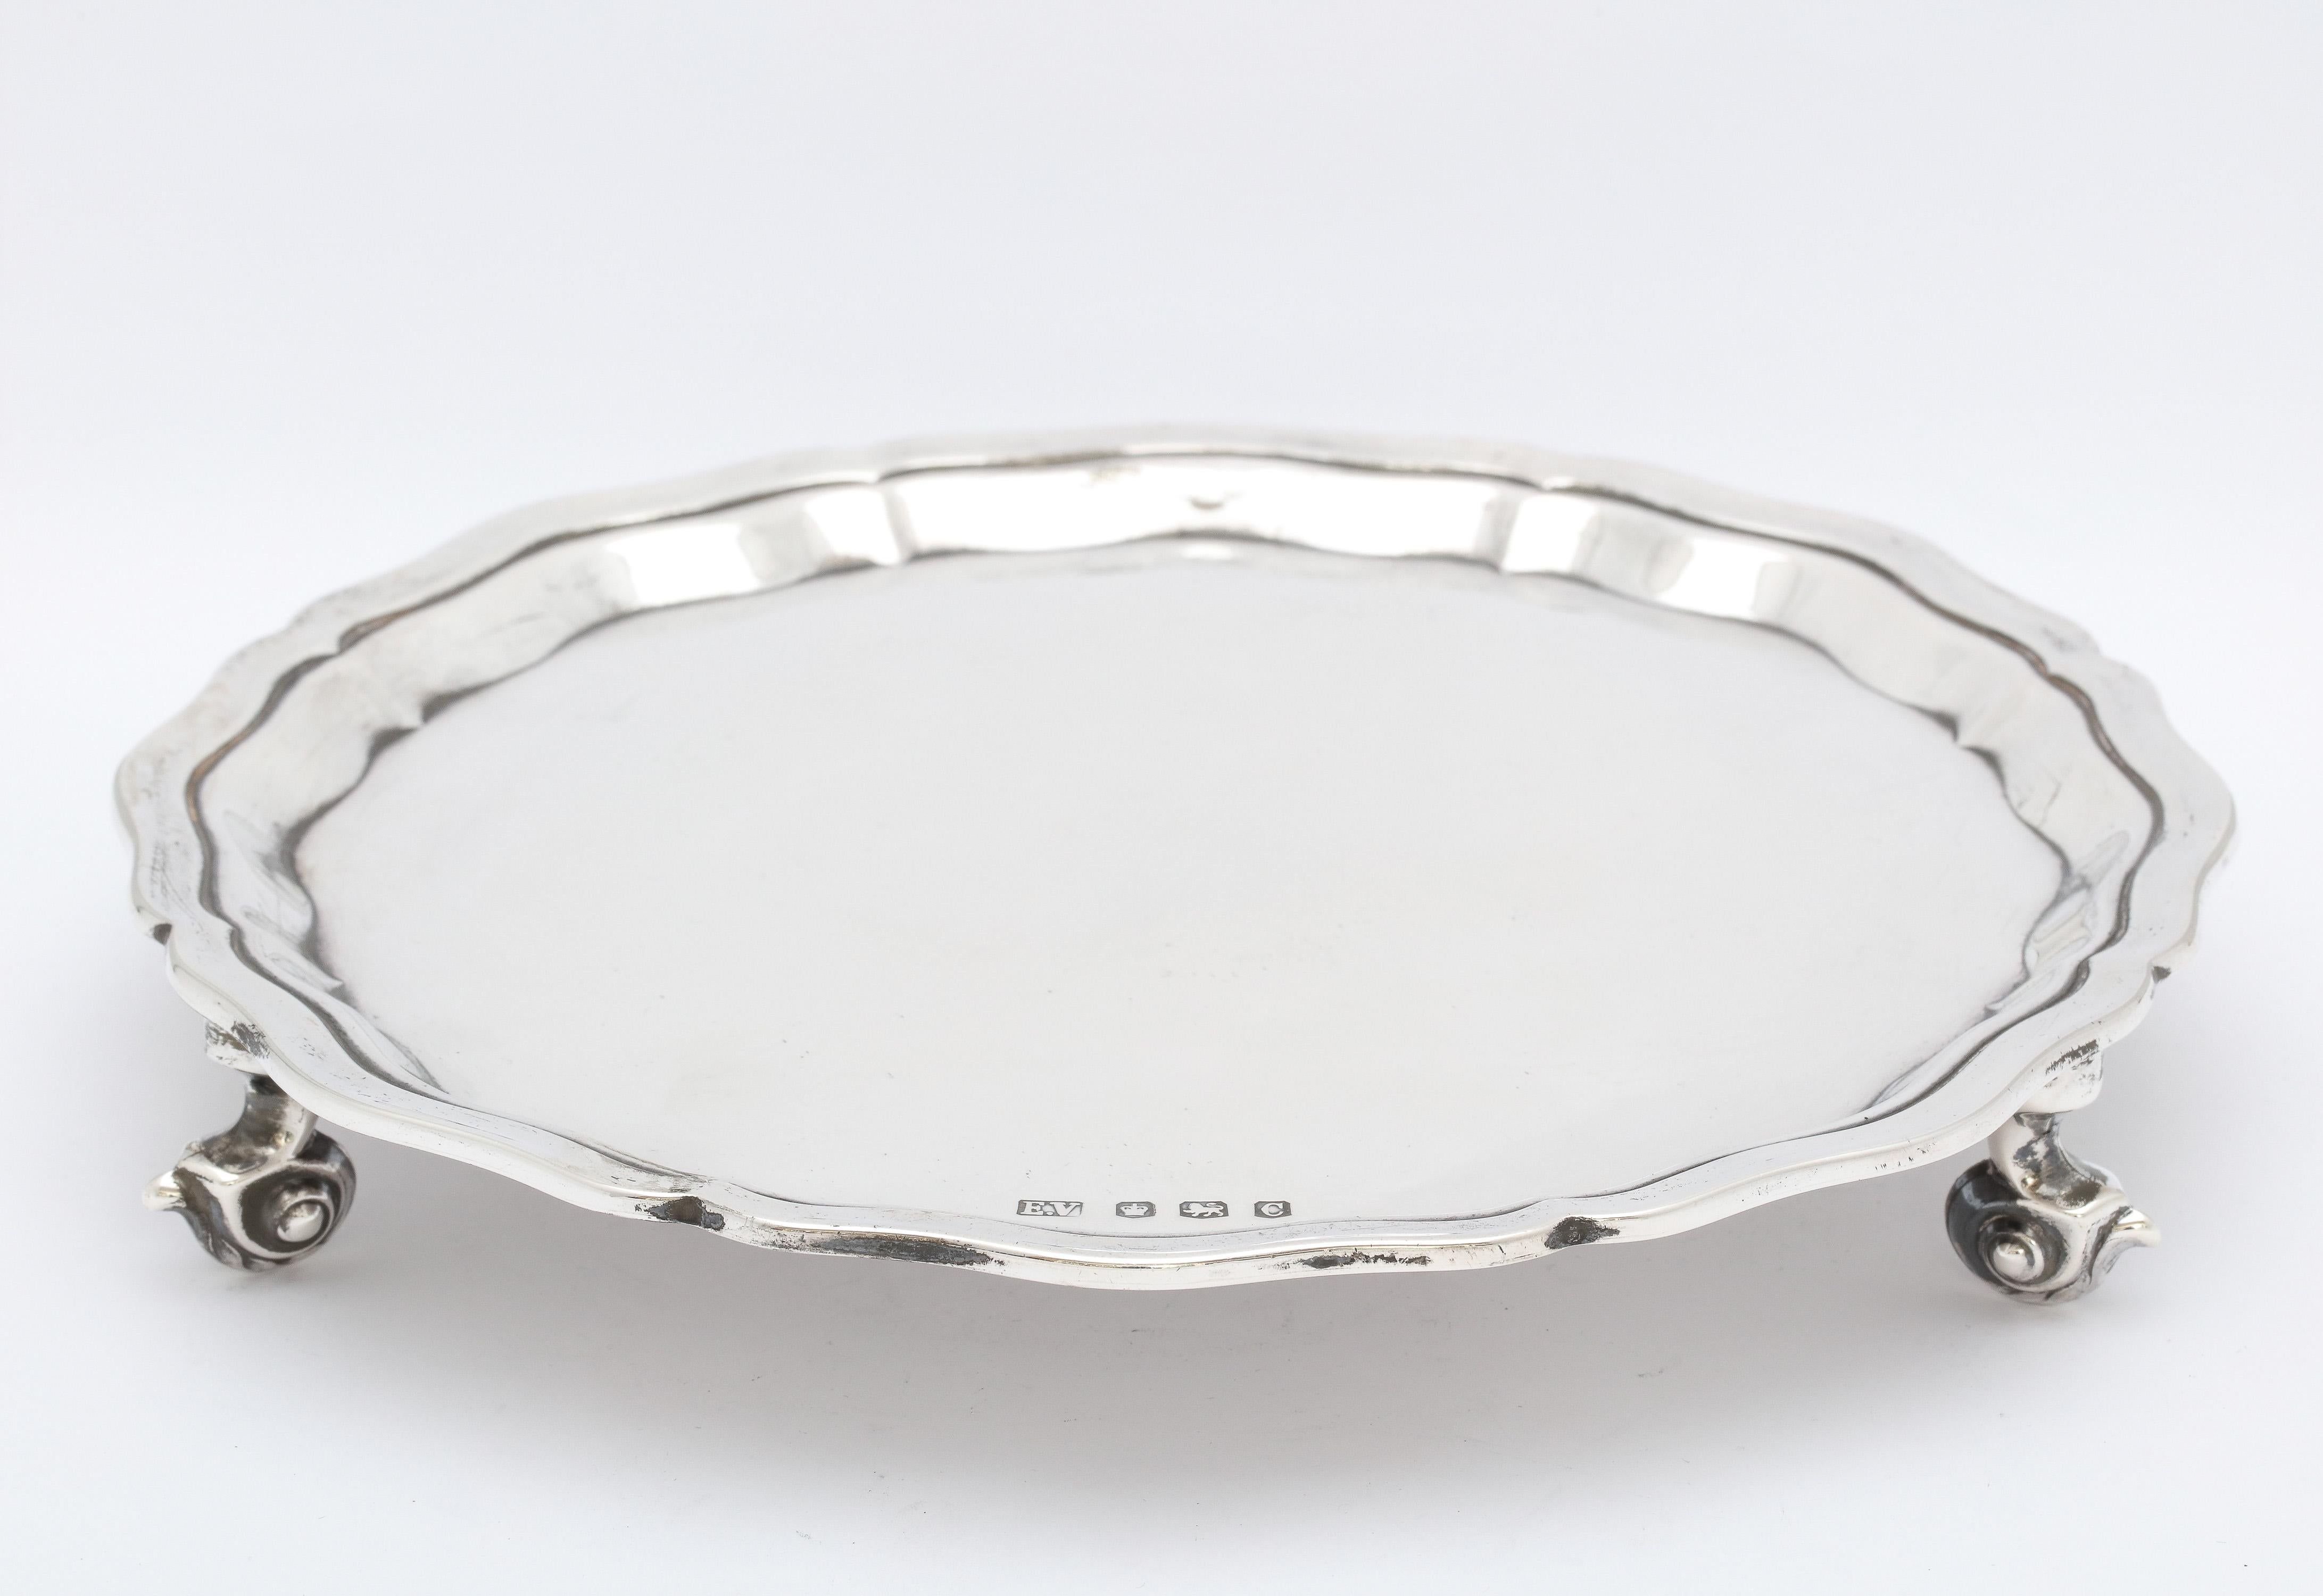 George VI Period, sterling silver footed salver/tray (in the George III Style), Sheffield, England, year-hallmarked for 1945, Emile Viner - maker. Scalloped border. Measures 8 inches diameter x 1 1/4 inches high. Weighs 10.235 Troy ounces. Dark